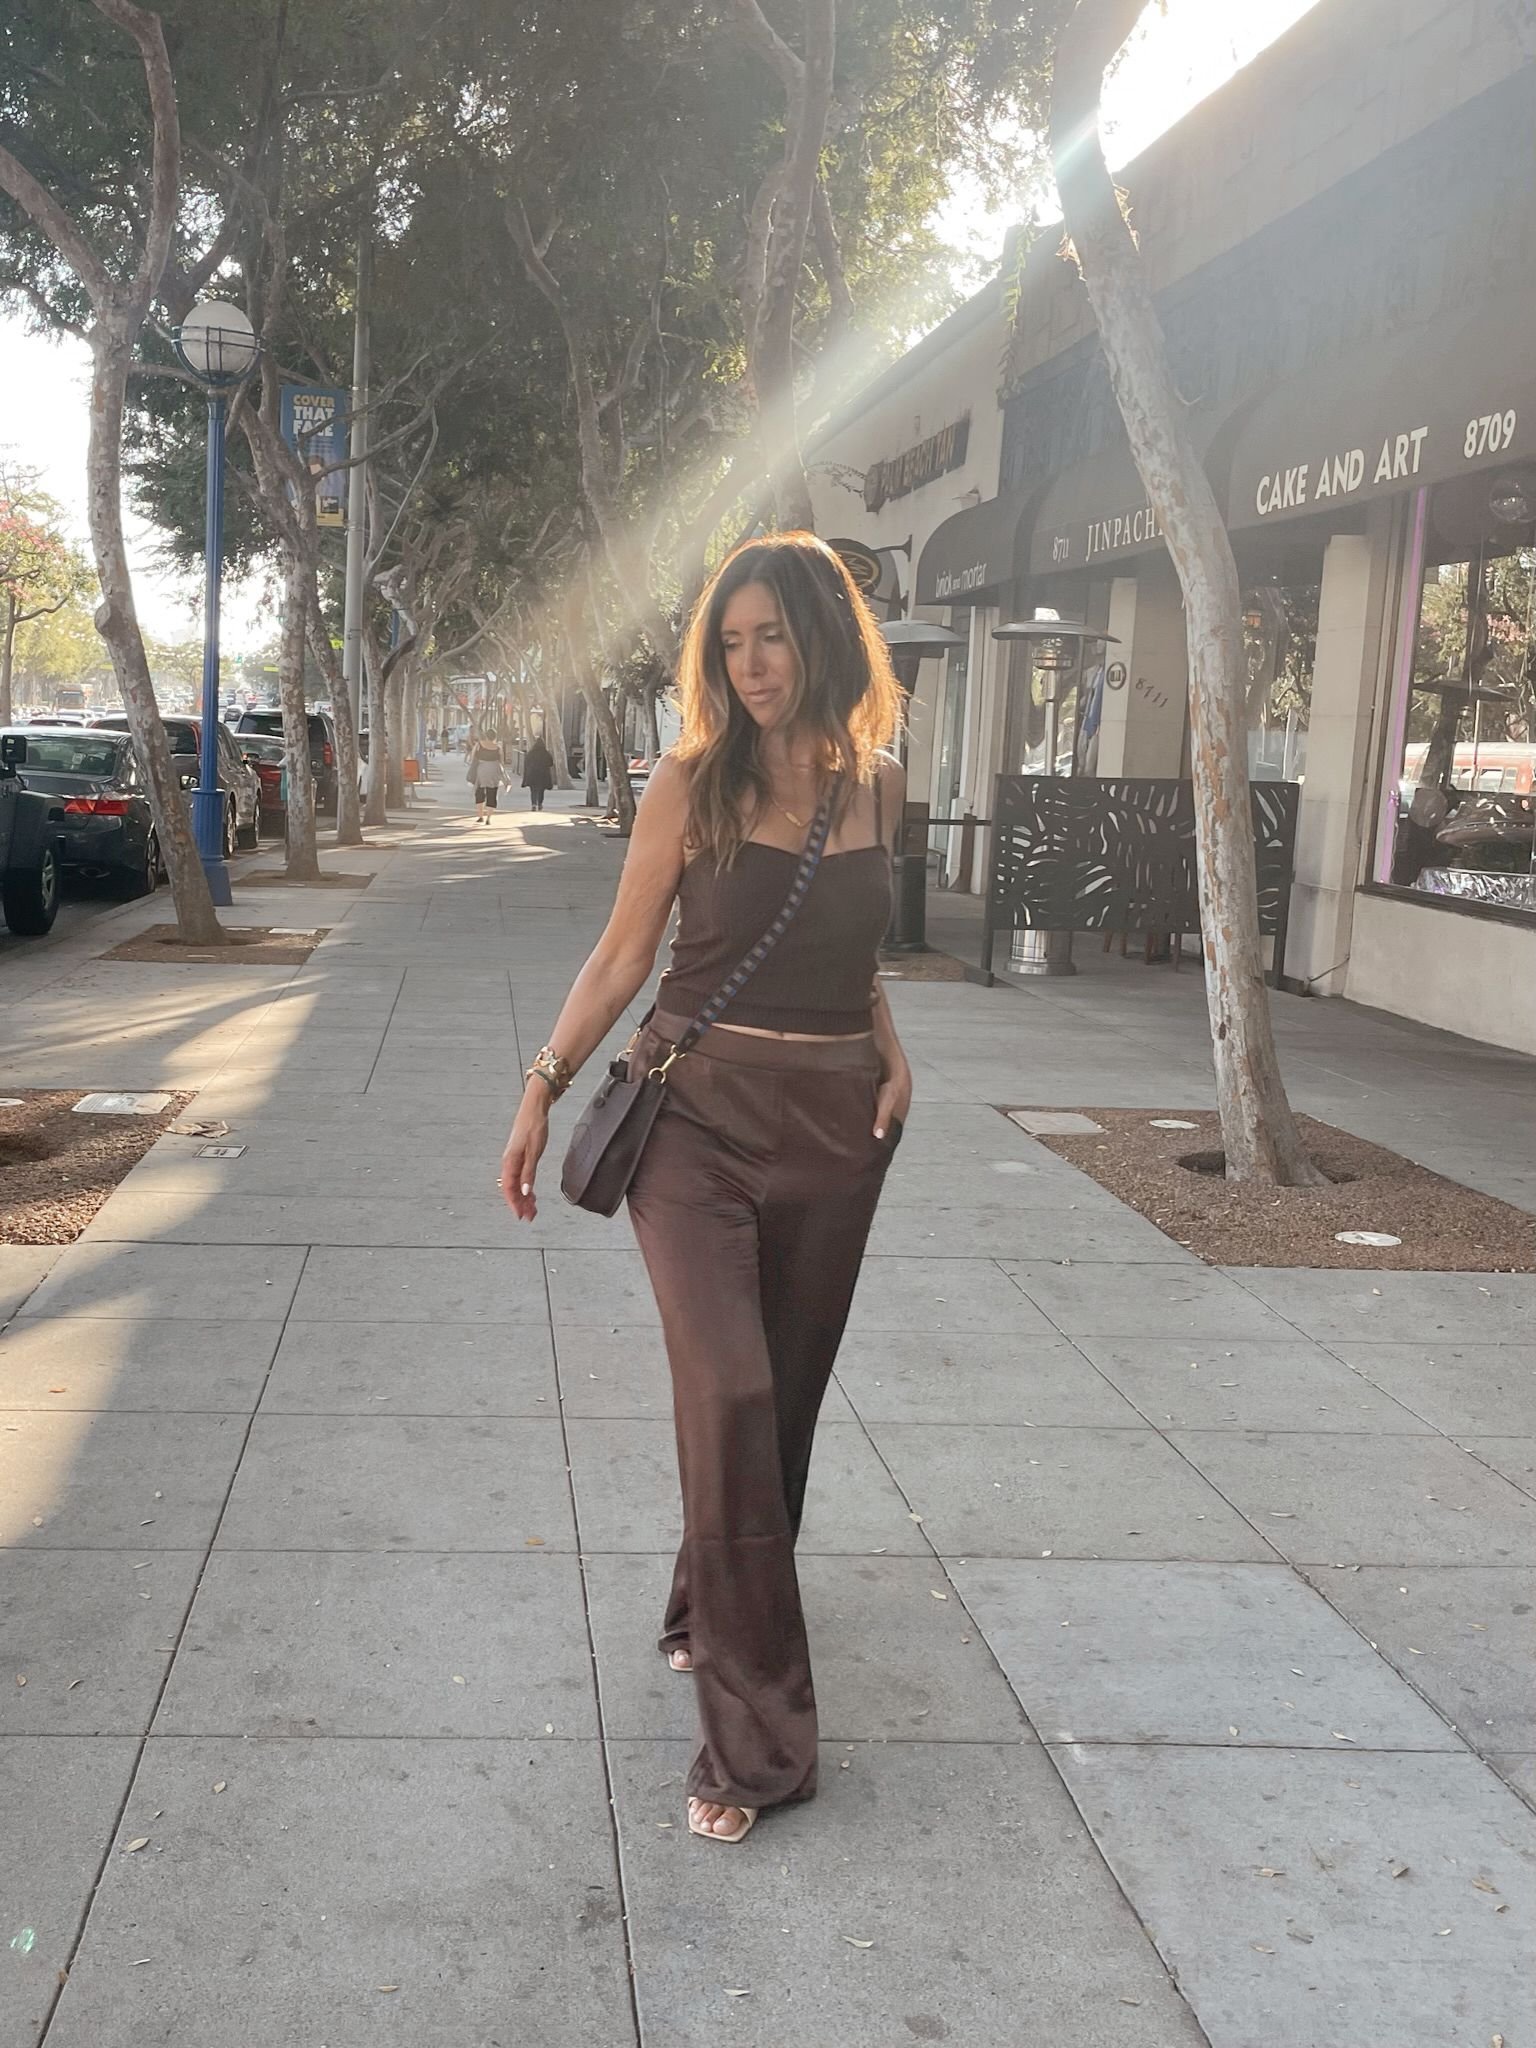 Wardrobe Update with This Chic Brown Outfit — The Glow Girl by